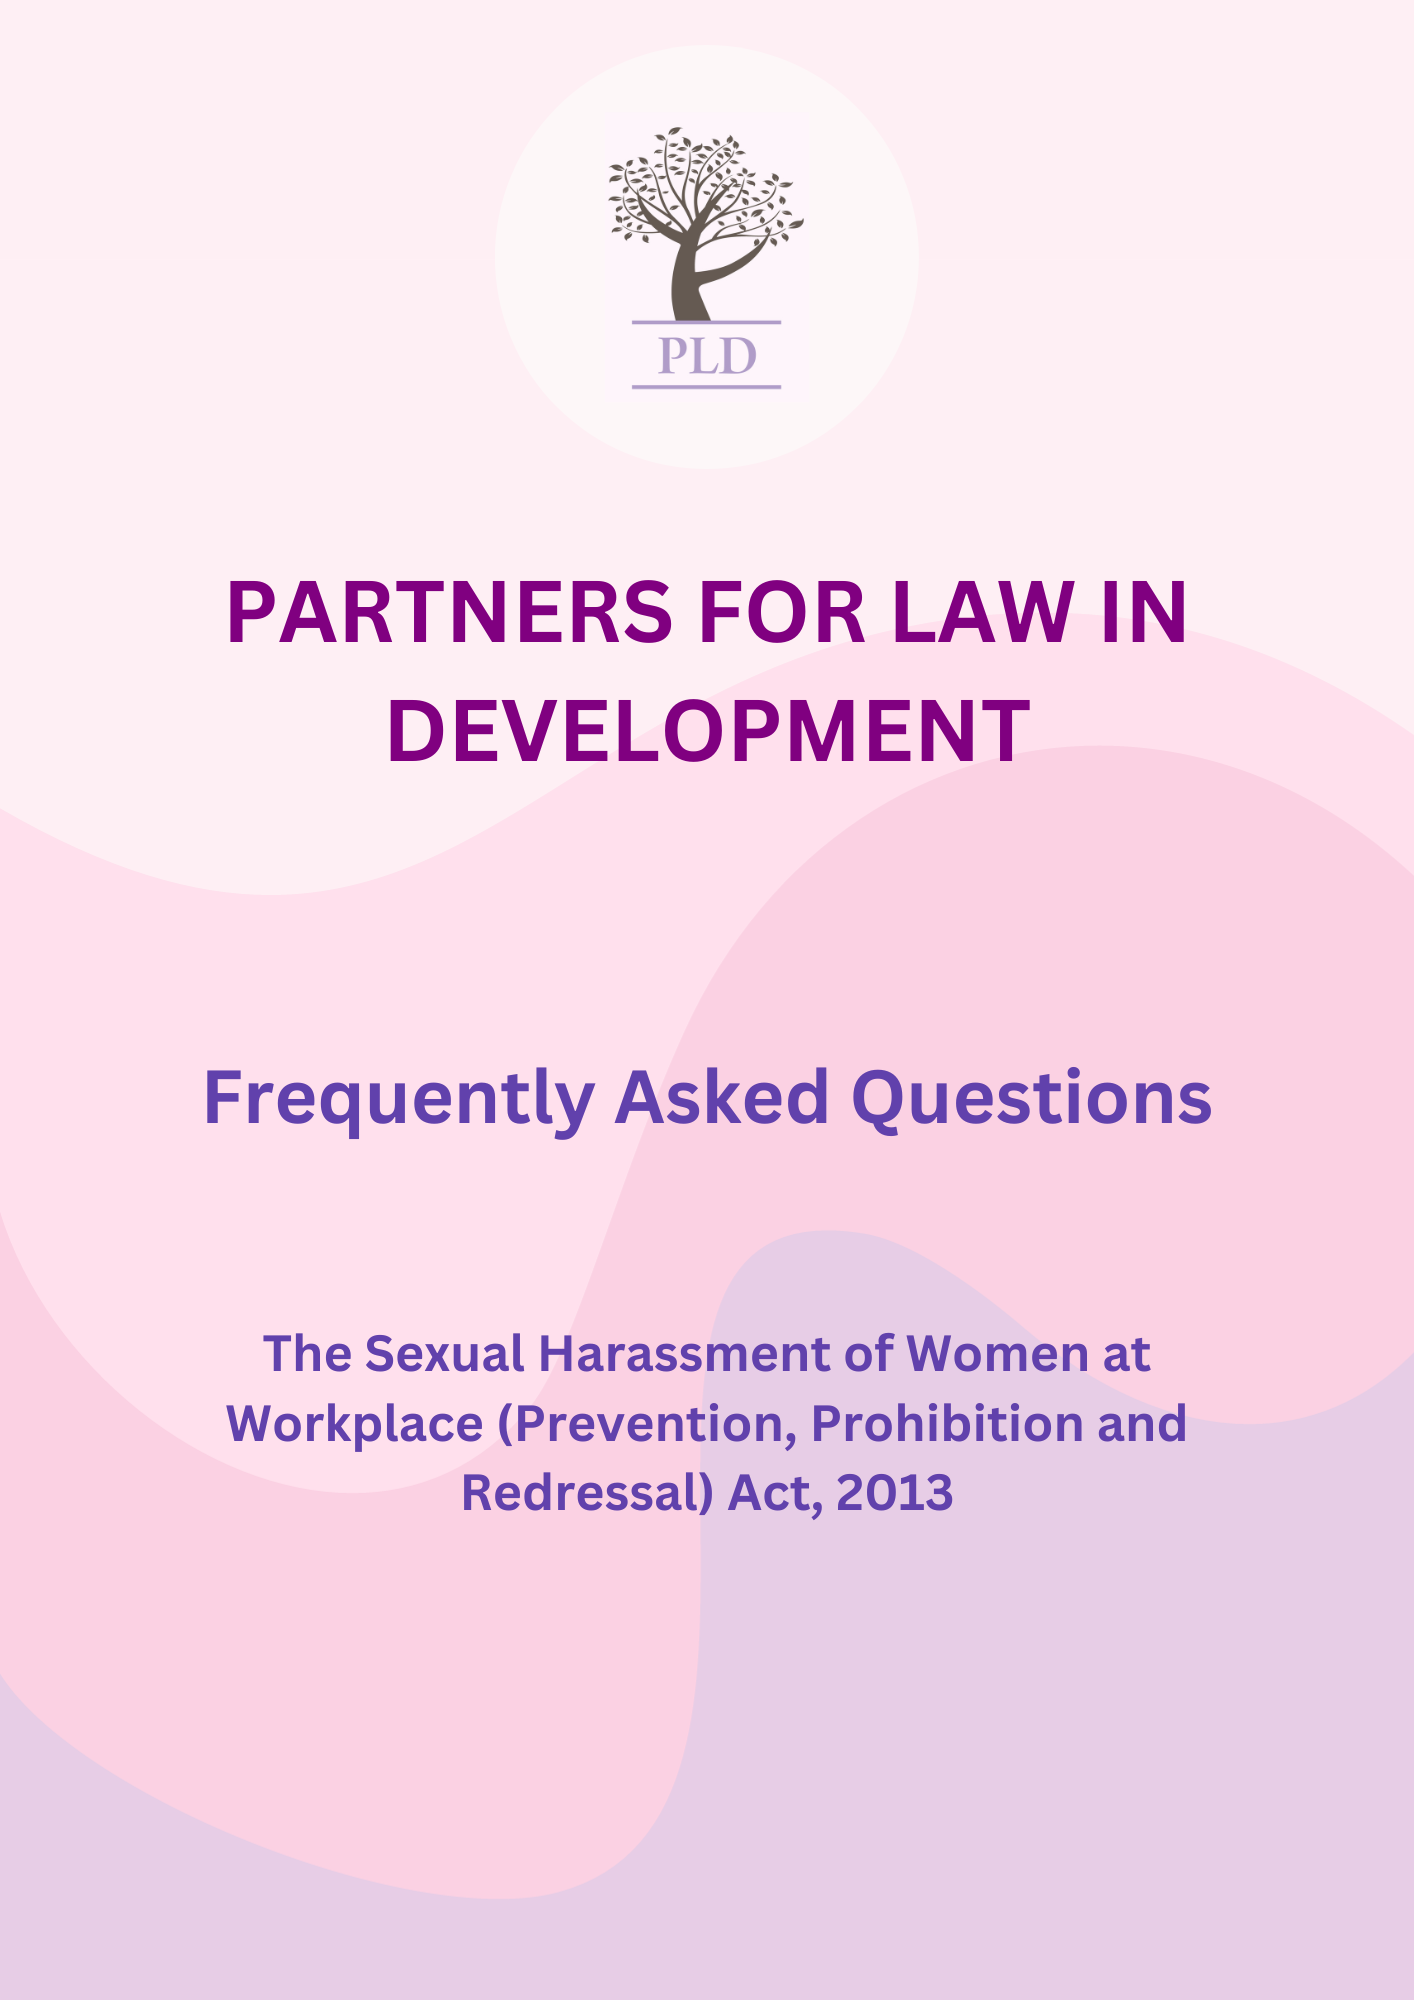 Frequently Asked Questions - The Sexual Harassment of Women at Workplace (Prevention, Prohibition and Redressal) Act, 2013